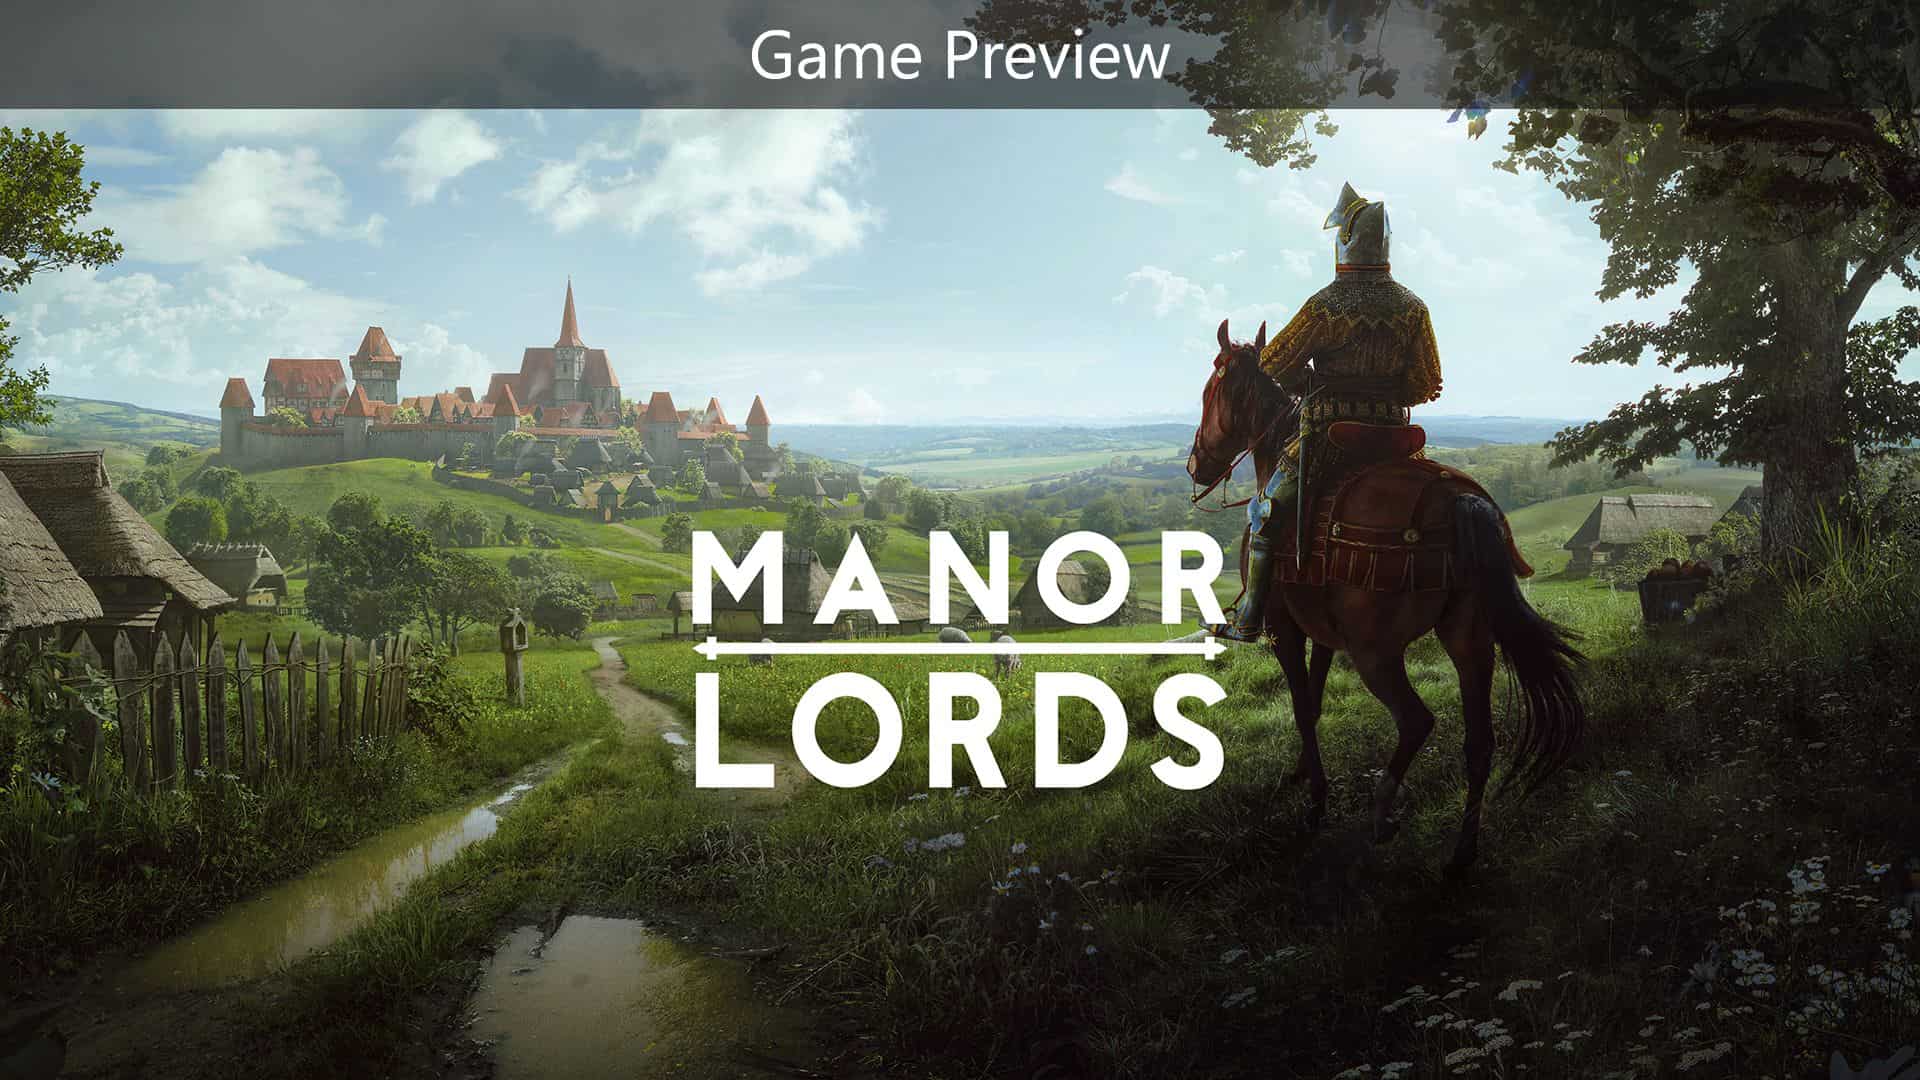 Manor Lords is coming to Game Pass